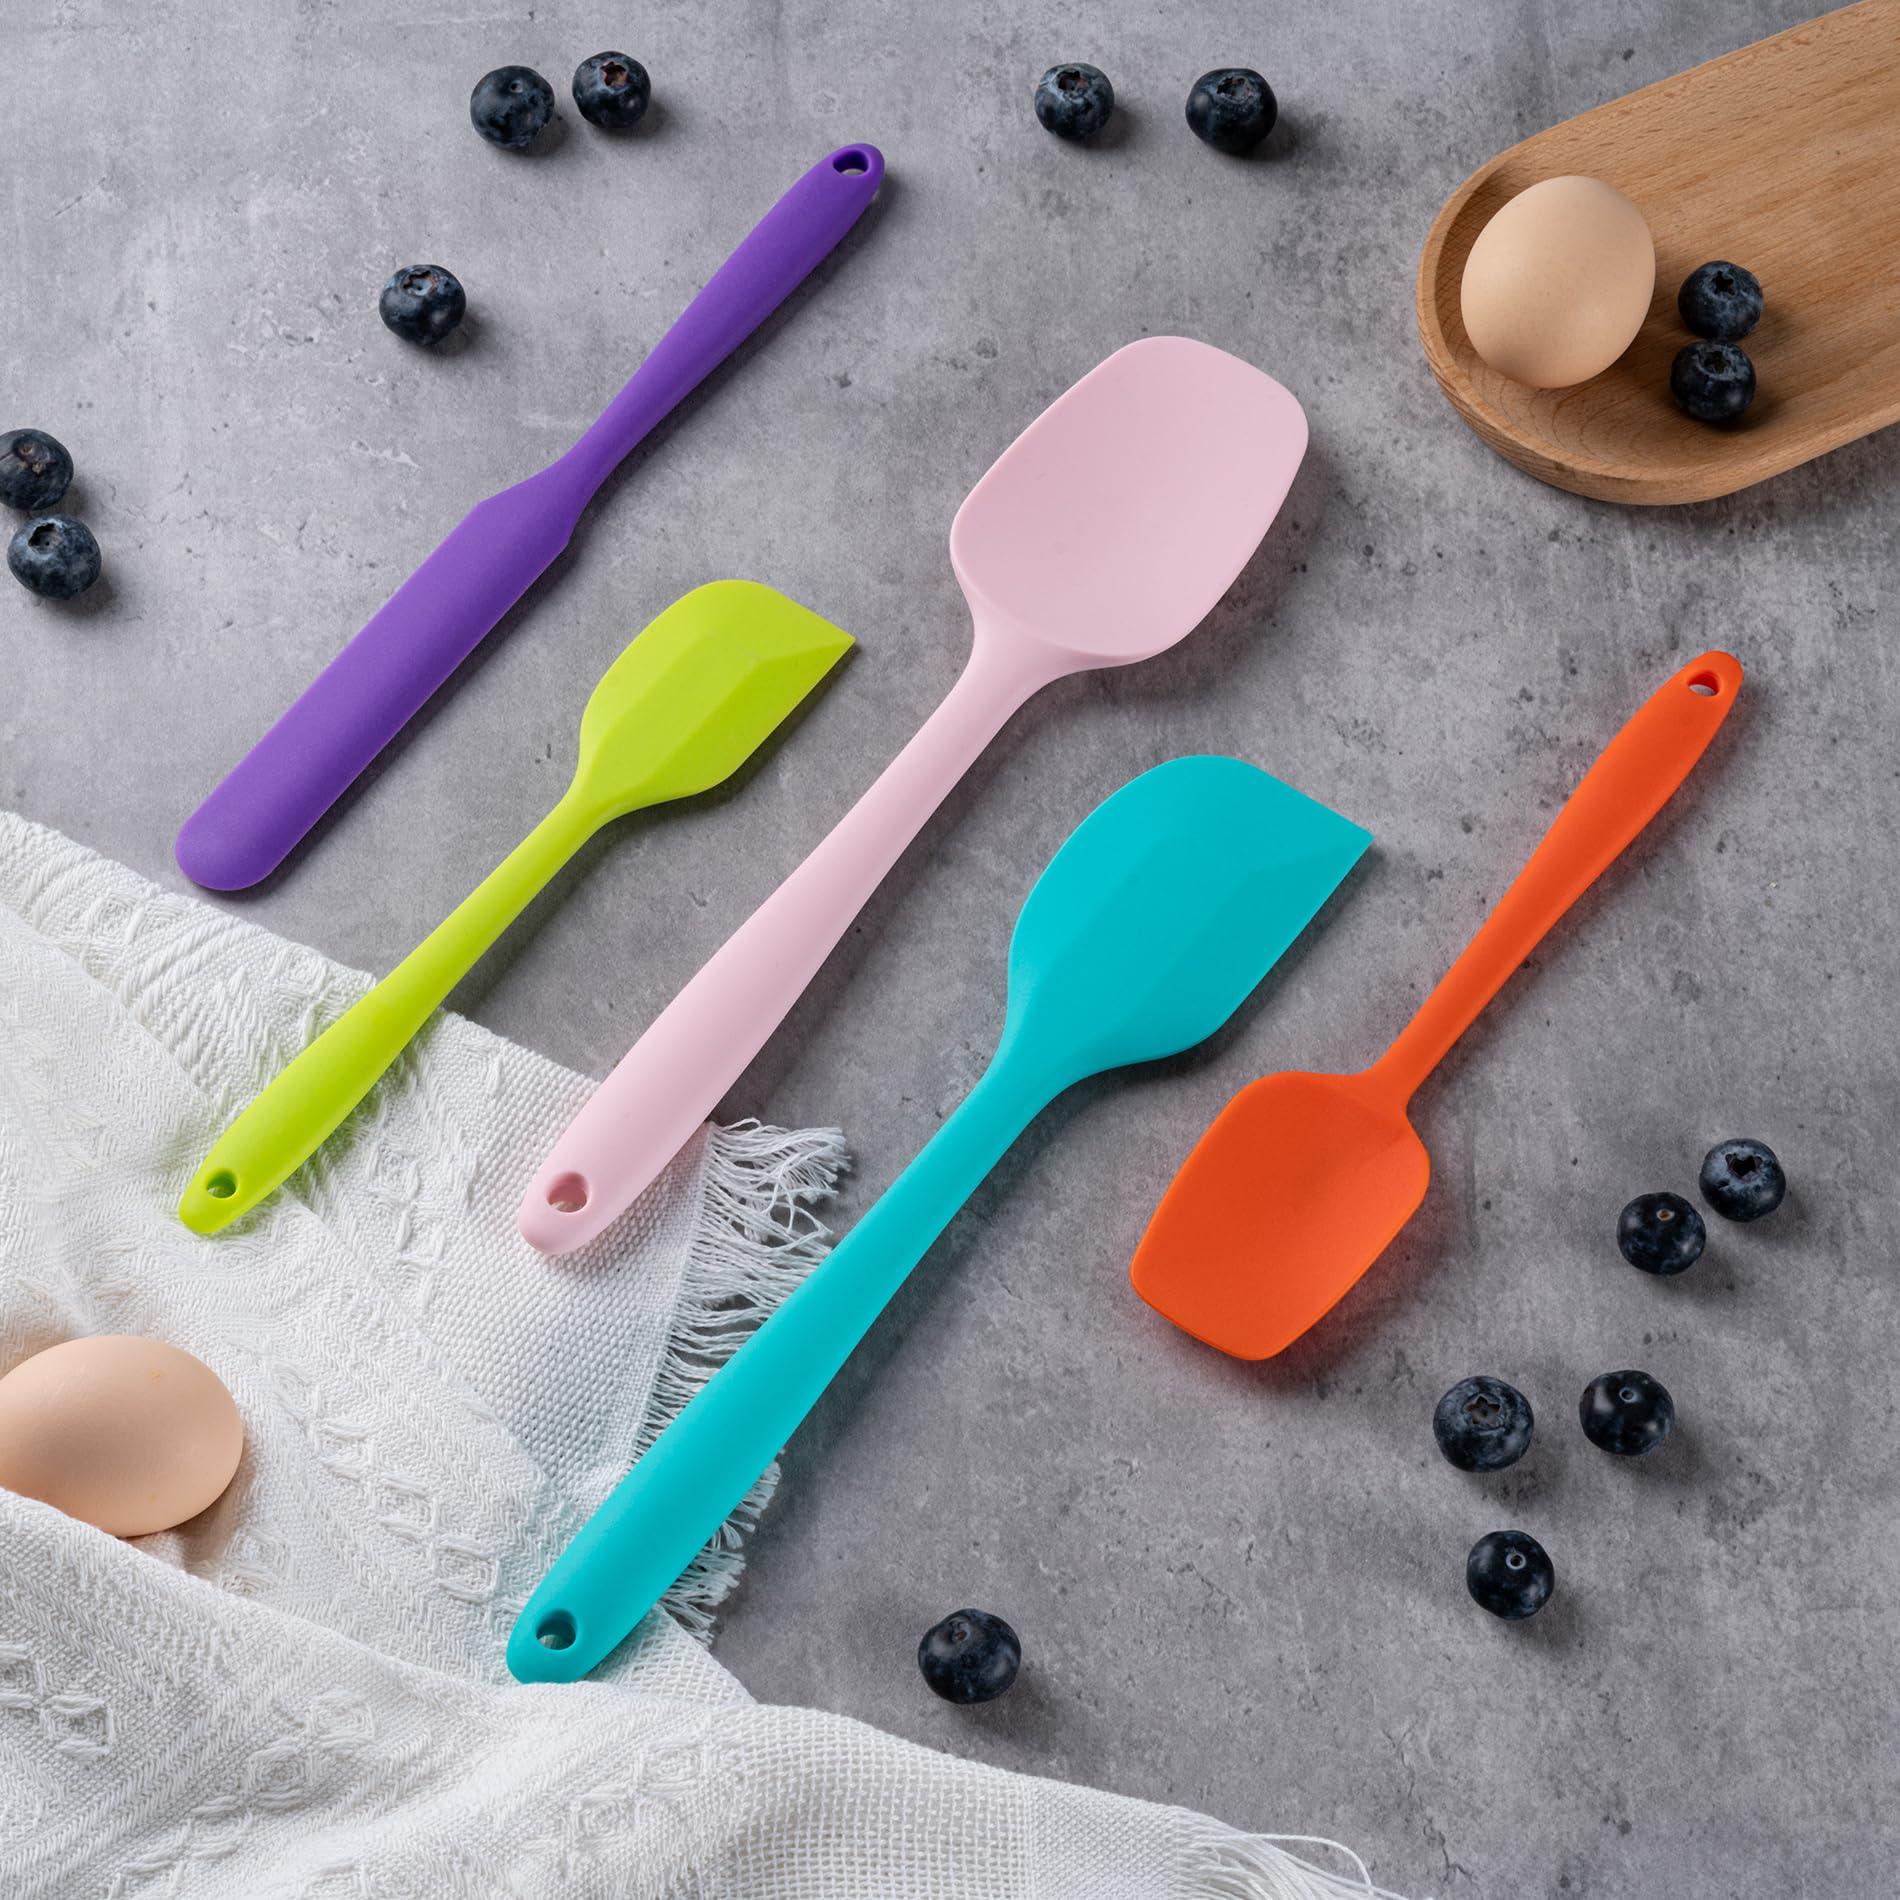 Silicone Spatula Set, 5 Piece Food Grade Rubber Spatulas for Baking, Cooking, and Mixing High Heat Resistant Non Stick Dishwasher Safe BPA-Free (Multicolor) - CookCave